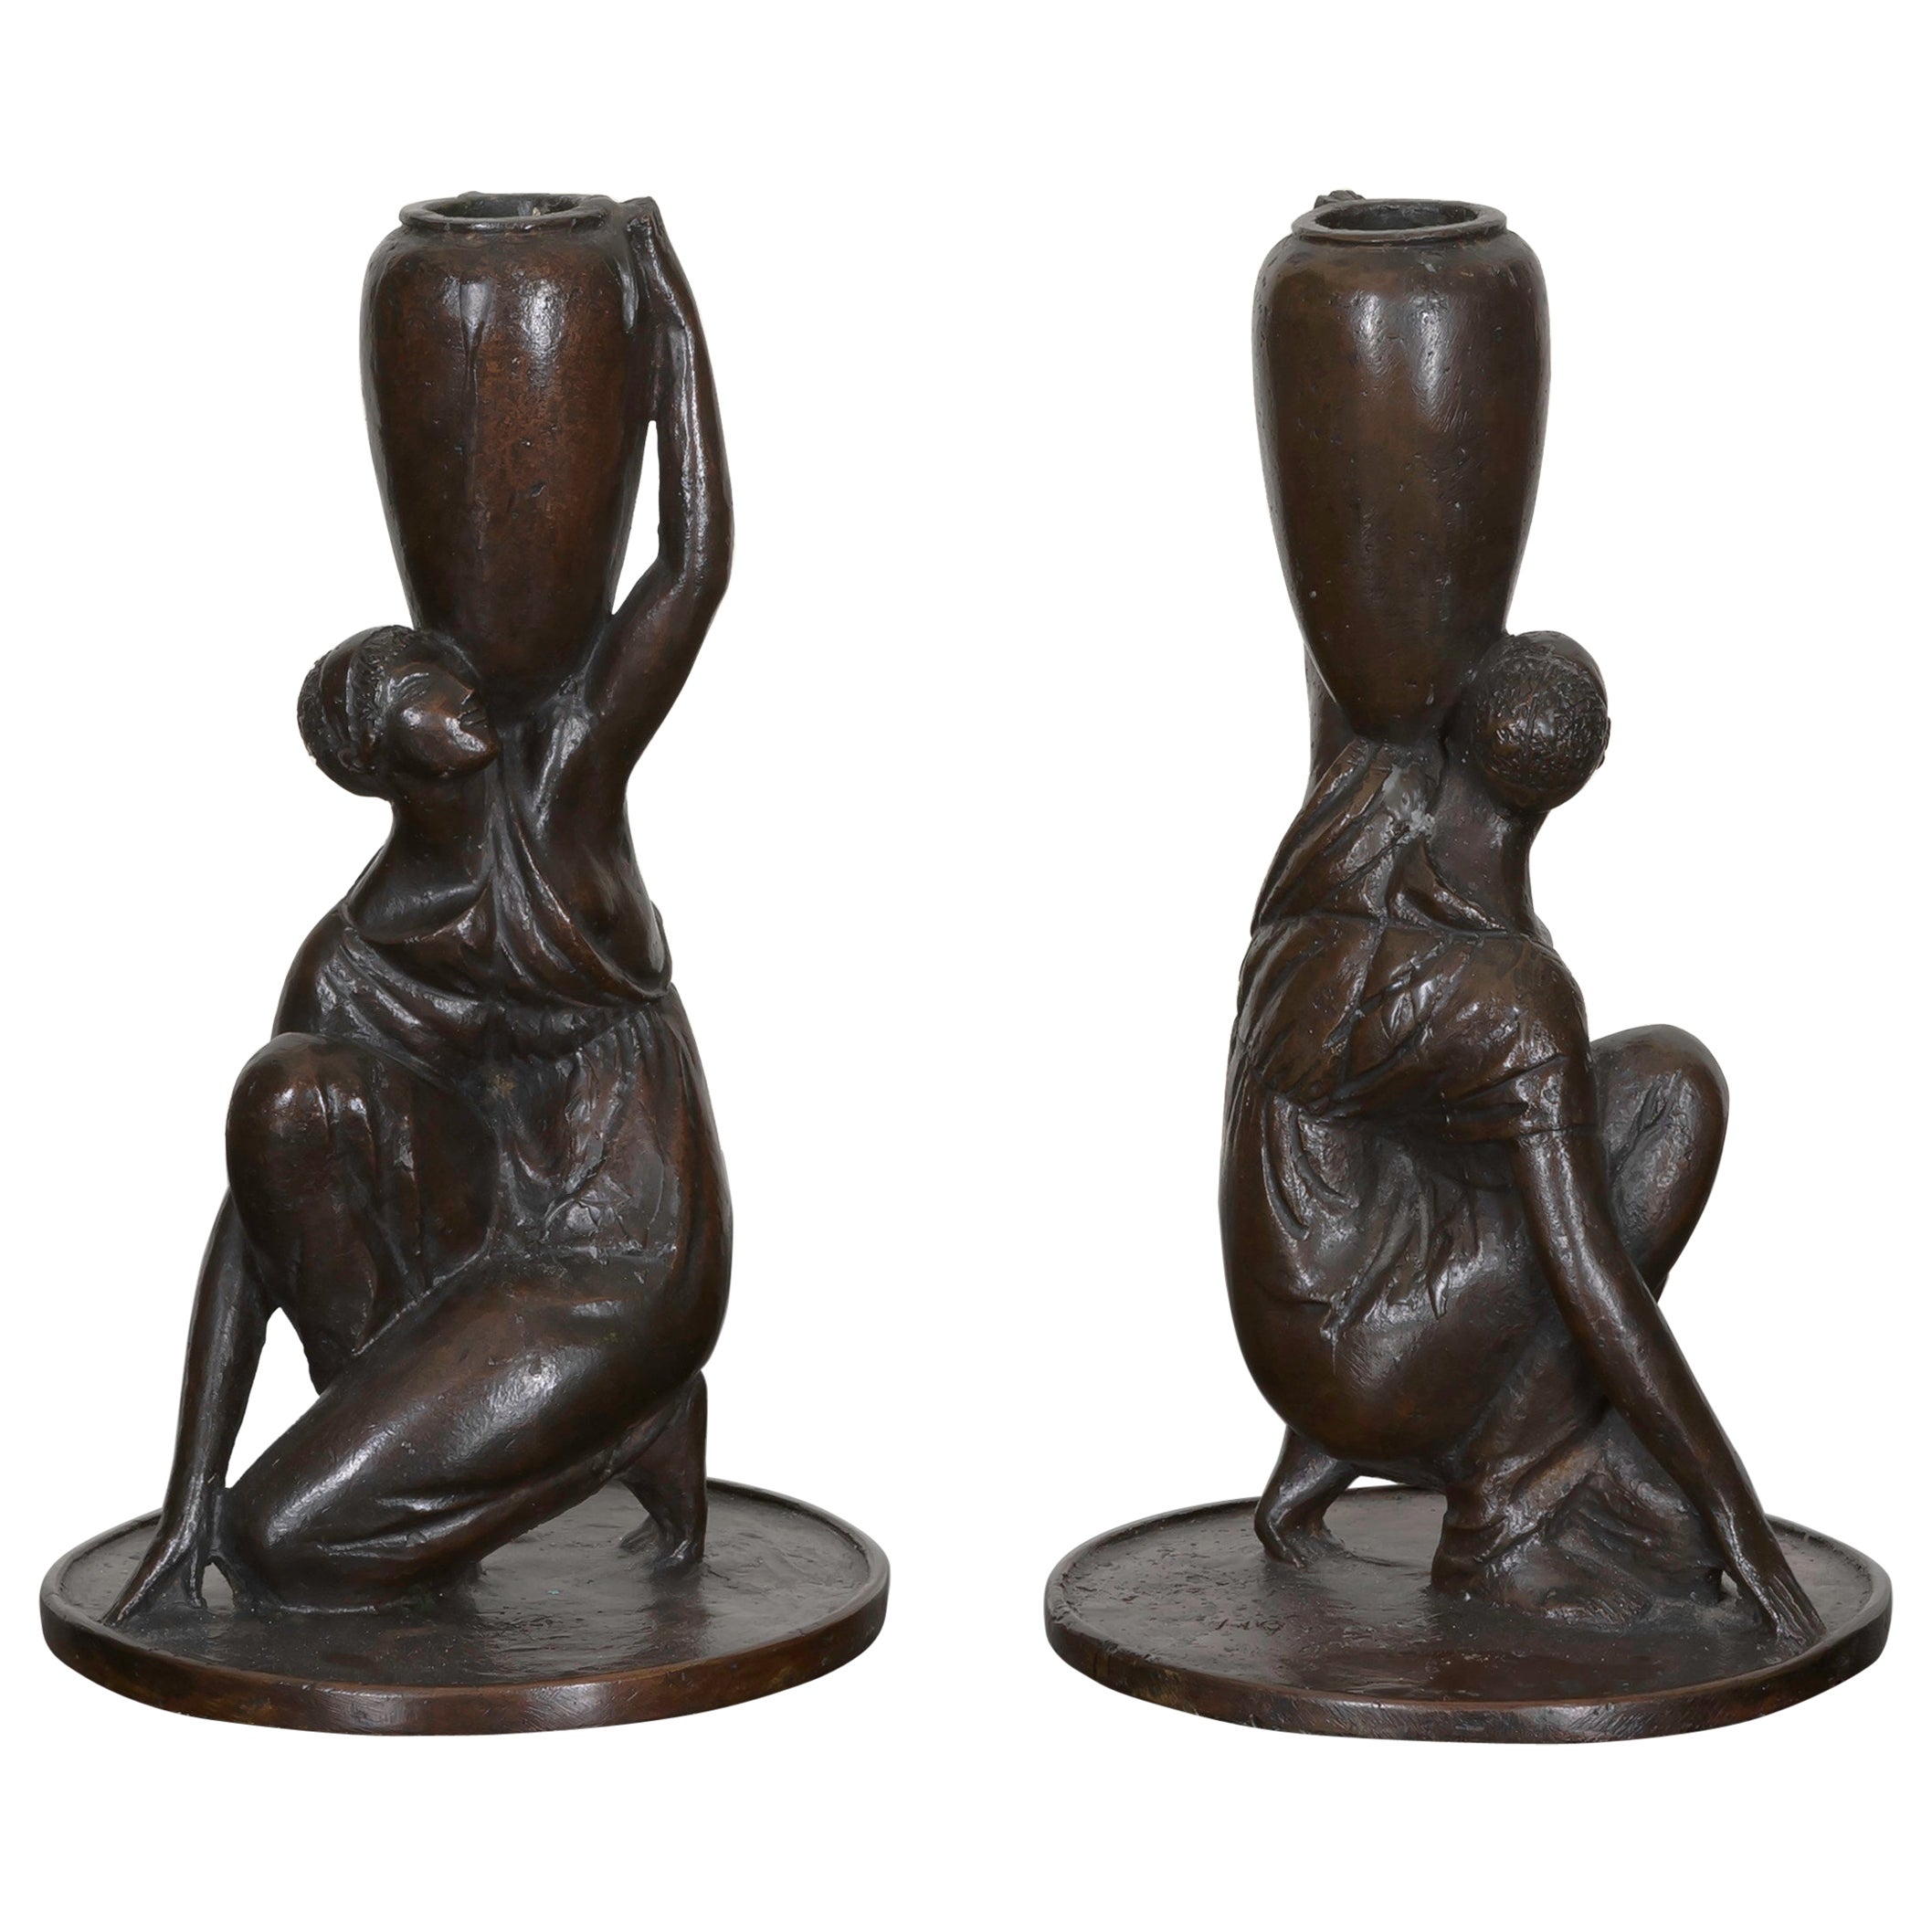 Two Sculptural Bronze Candlesticks by Cecil de Blaquiere Howard, Dated 1919 For Sale